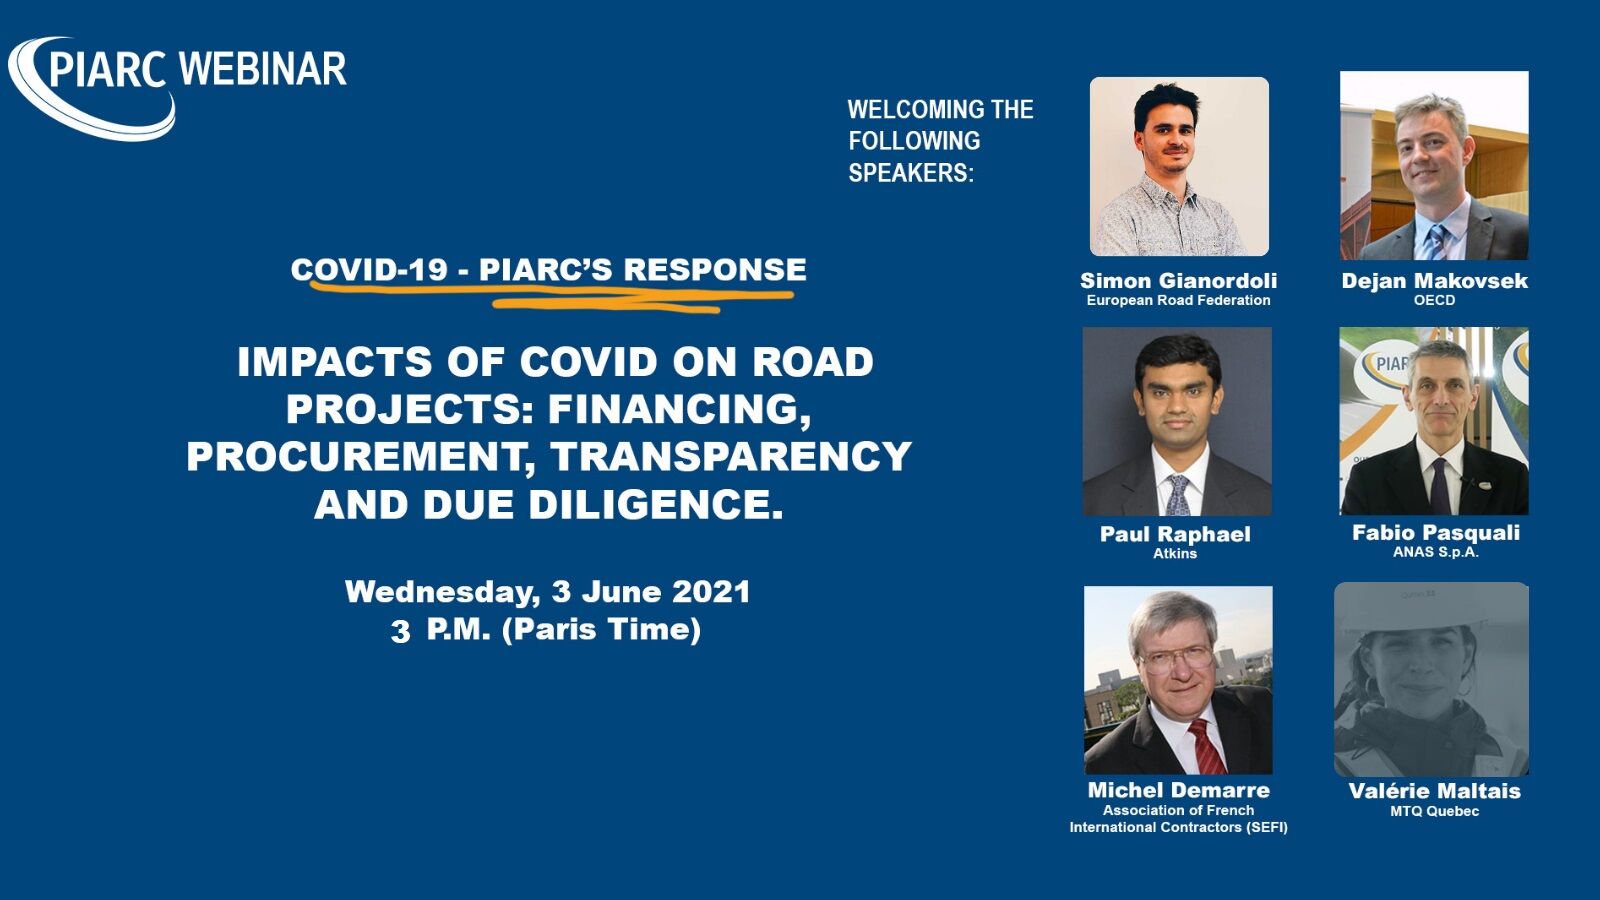 Register now: 3 June is PIARC’s next webinar on the
impact of Covid-19 on road projects